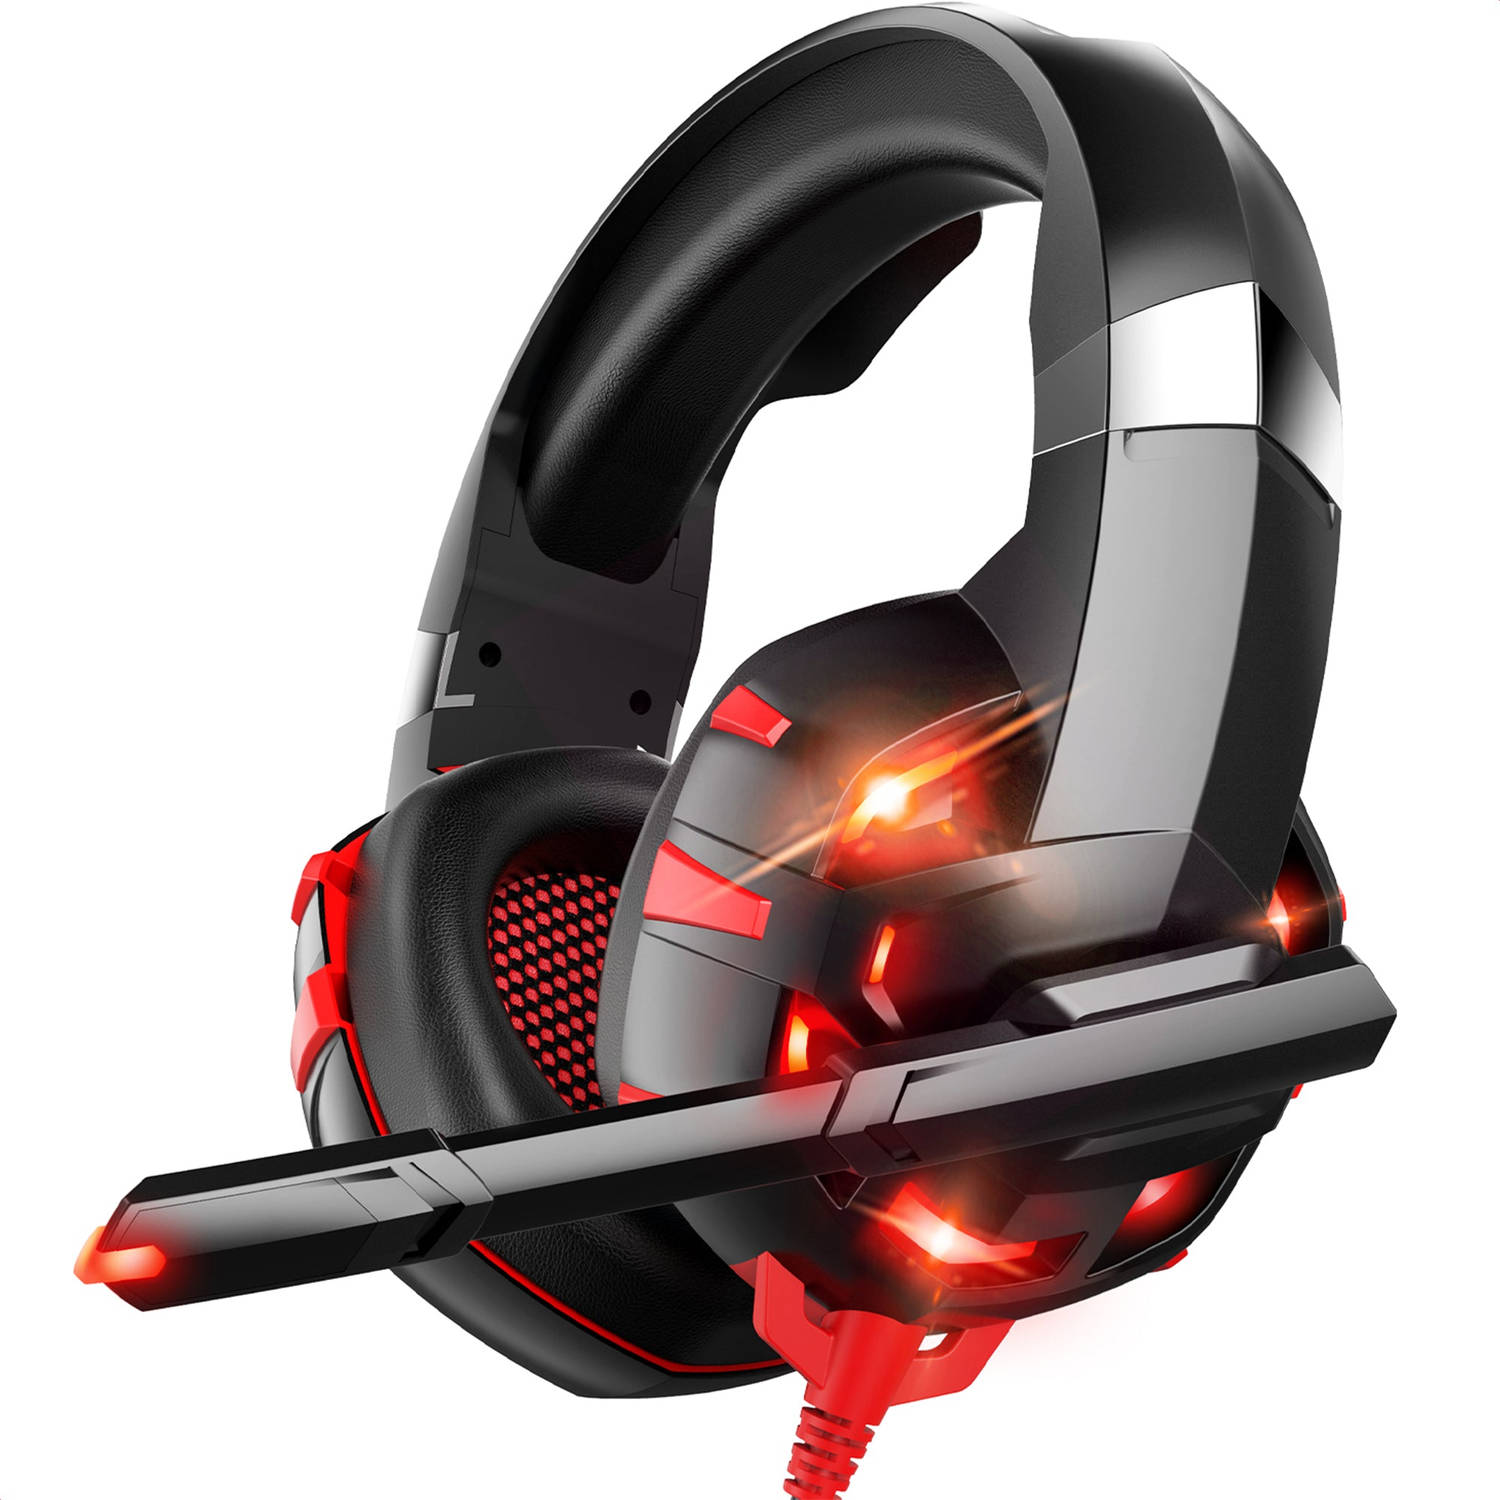 Strex Gaming Headset Met Microfoon Rood Pc + Ps4 + Ps5 + Xbox One + Xbox Series